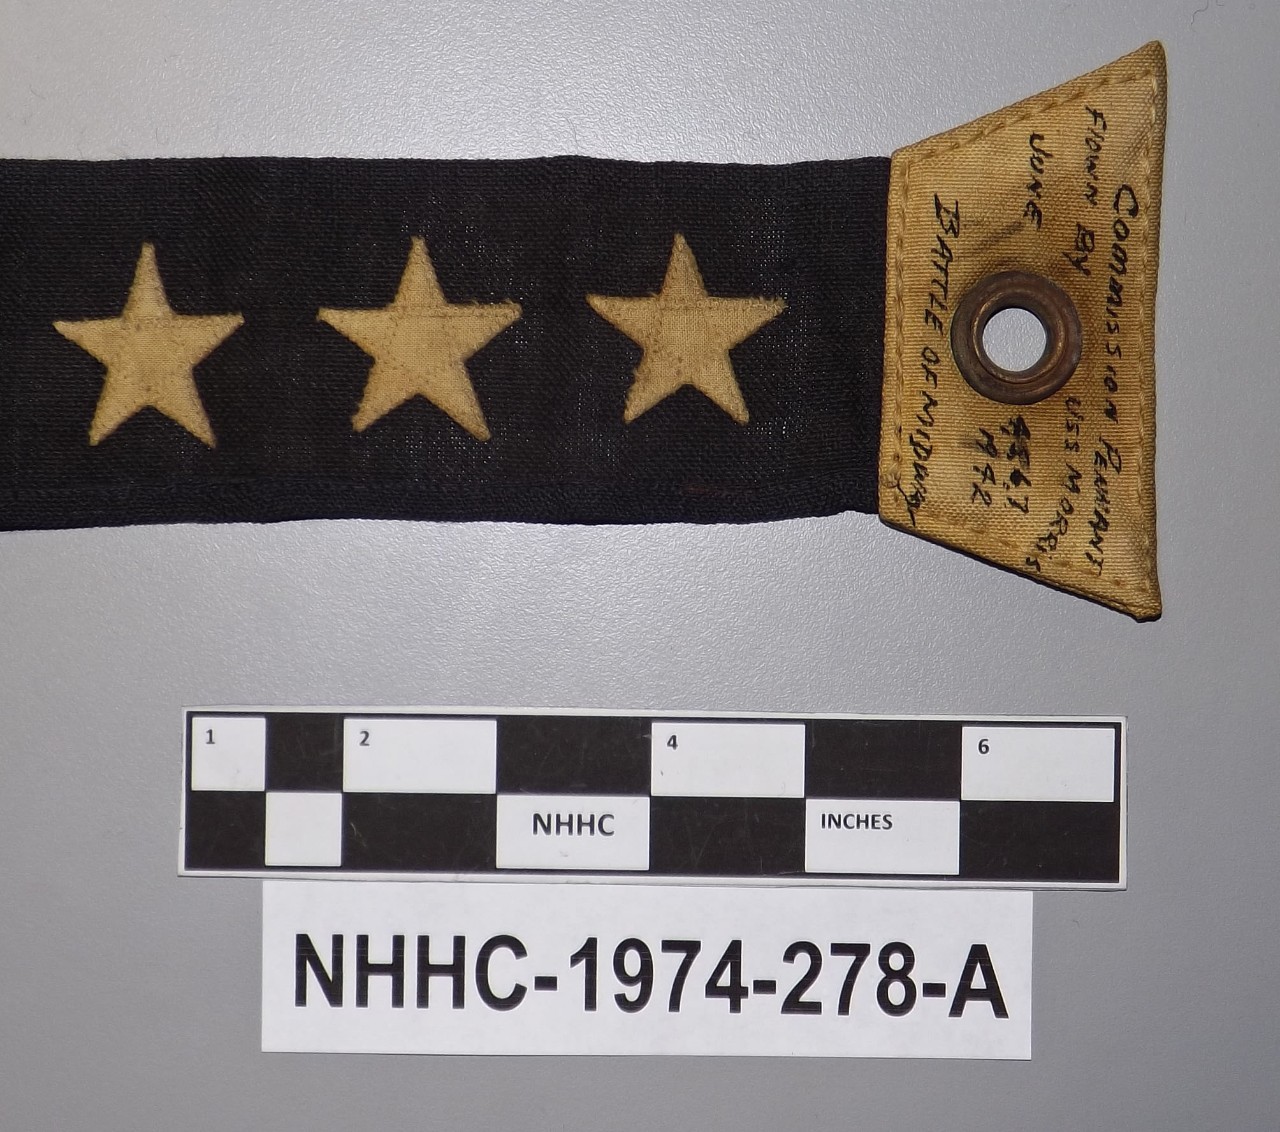 One US Navy commissioning pennant from USS Morris (DD-417). Black ink lettering on the hoist reads "Commission Pennant / flown by USS Morris / June 4, 5, 6, 7, / 1942 / Battle of Midway".